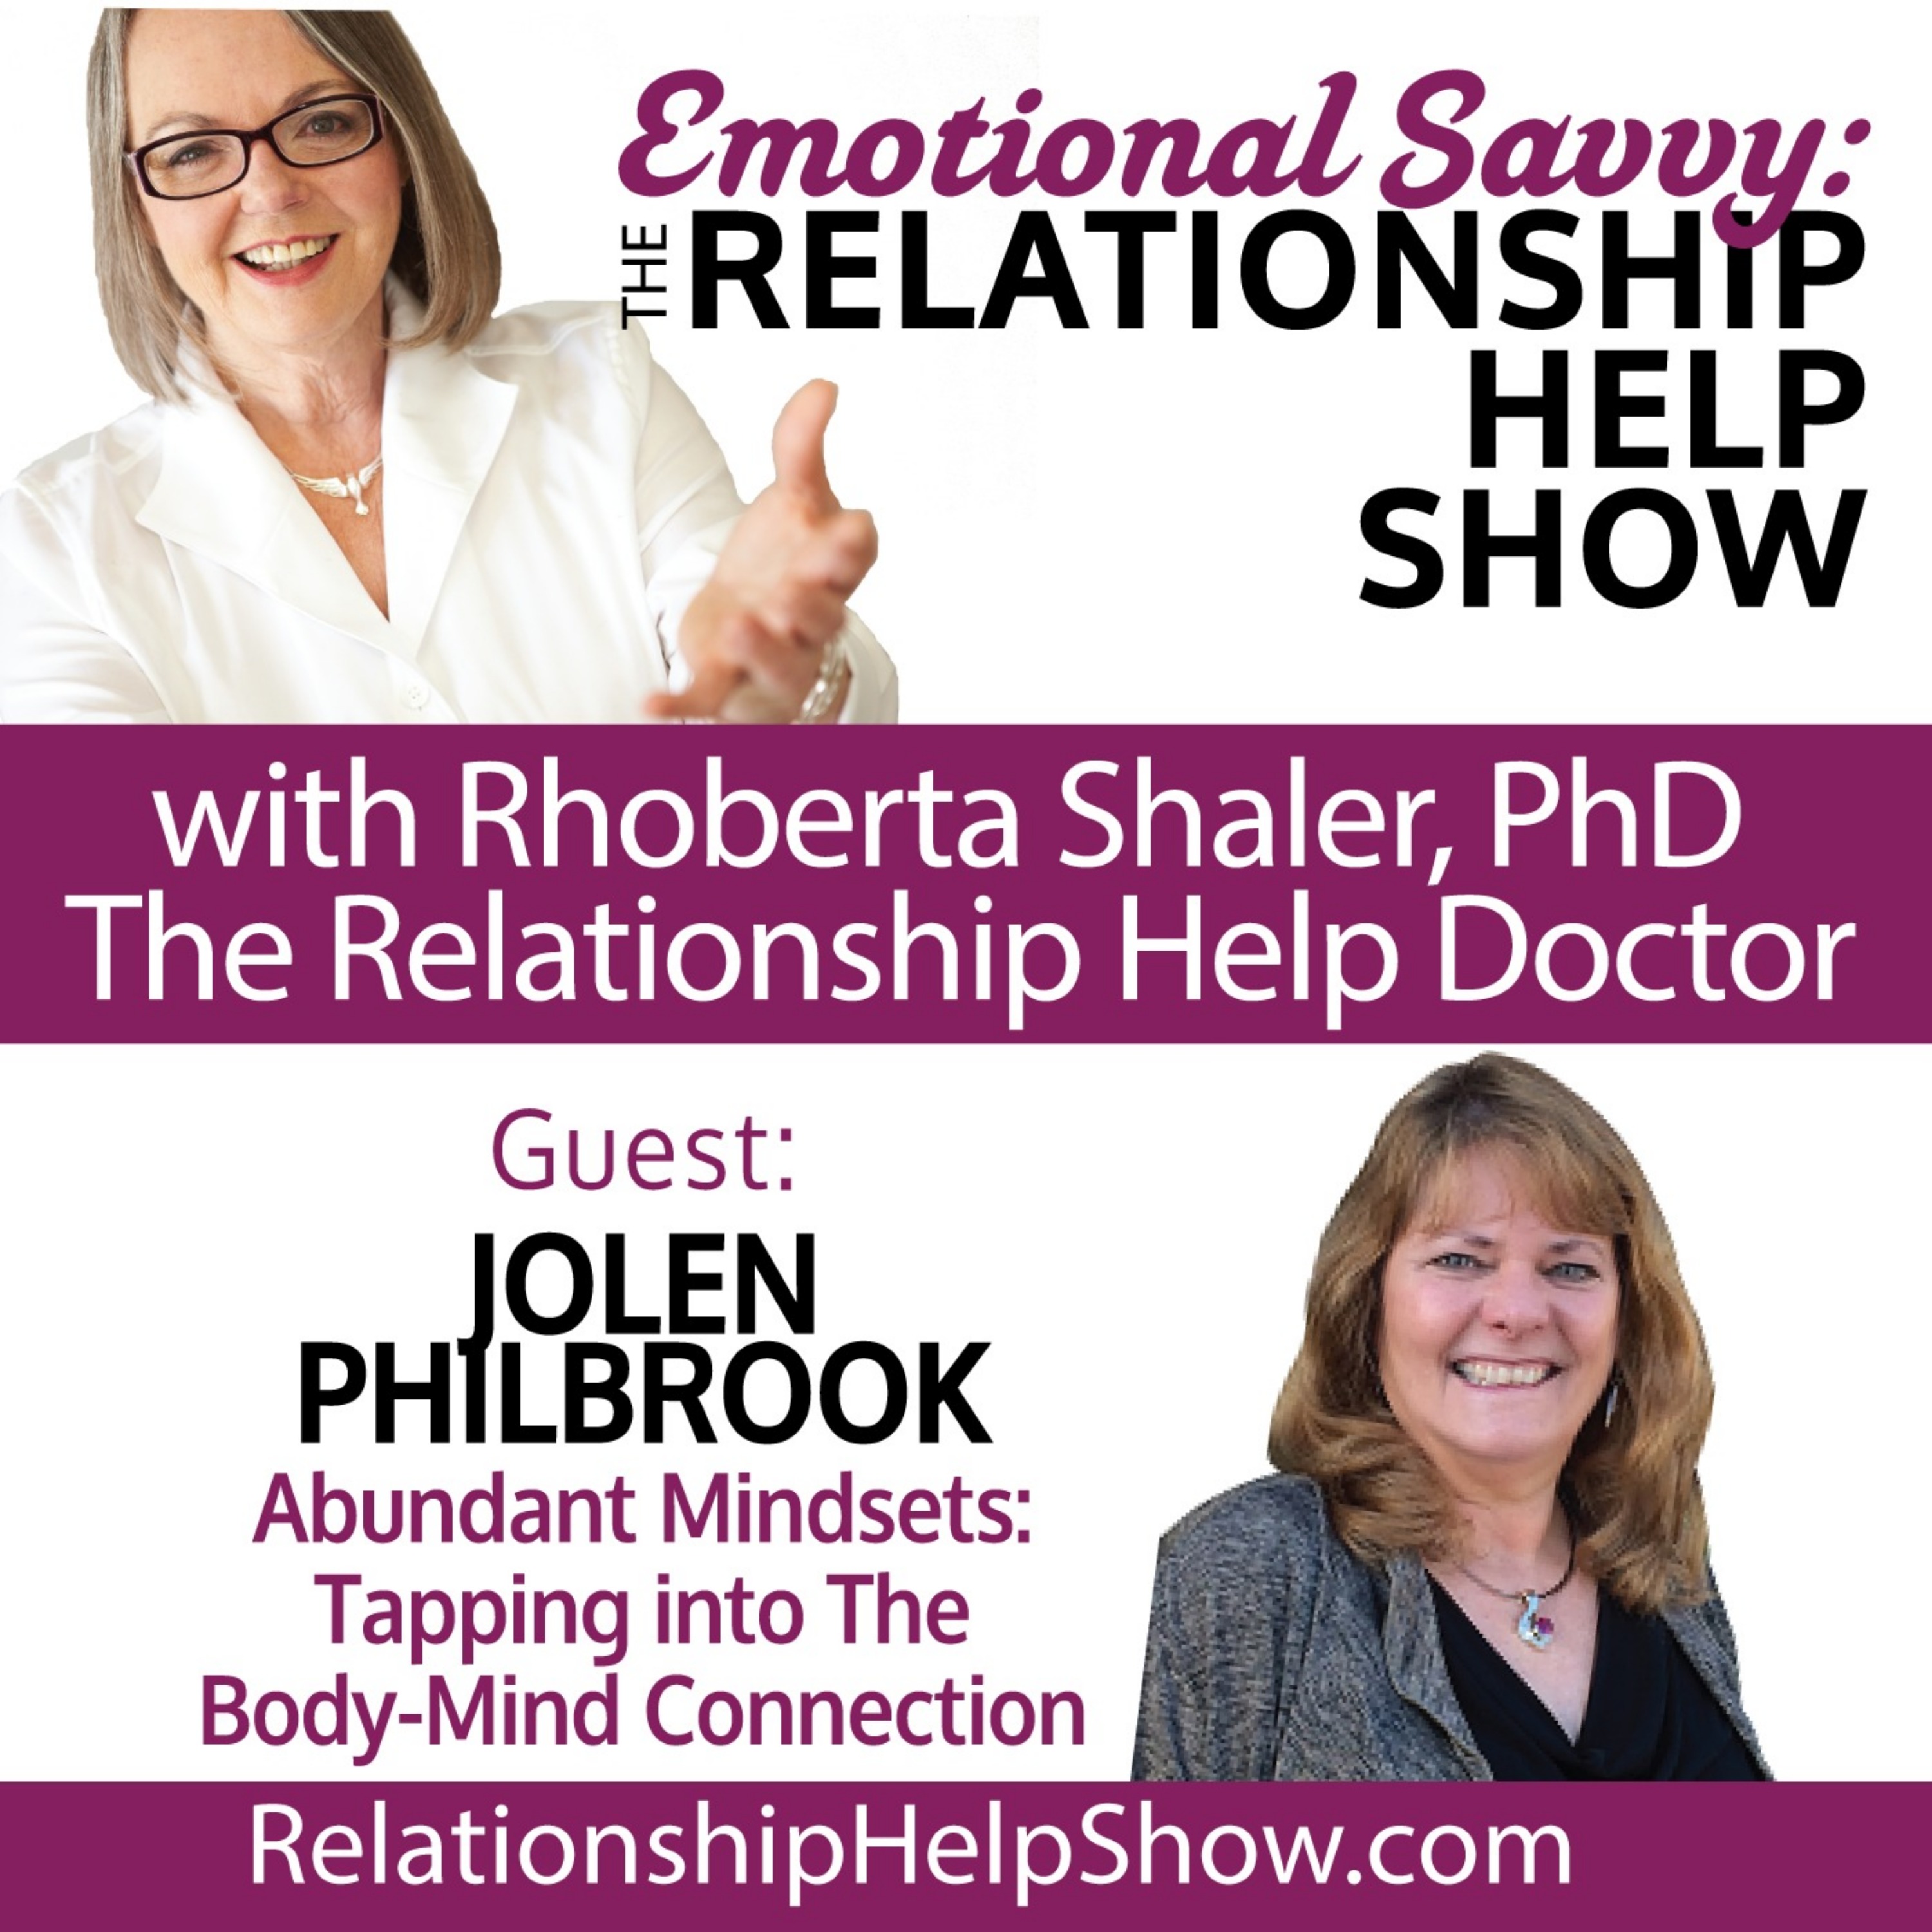 Abundance, Prosperity & Tapping Into The Body-Mind Connection GUEST: Jolen Philbrook